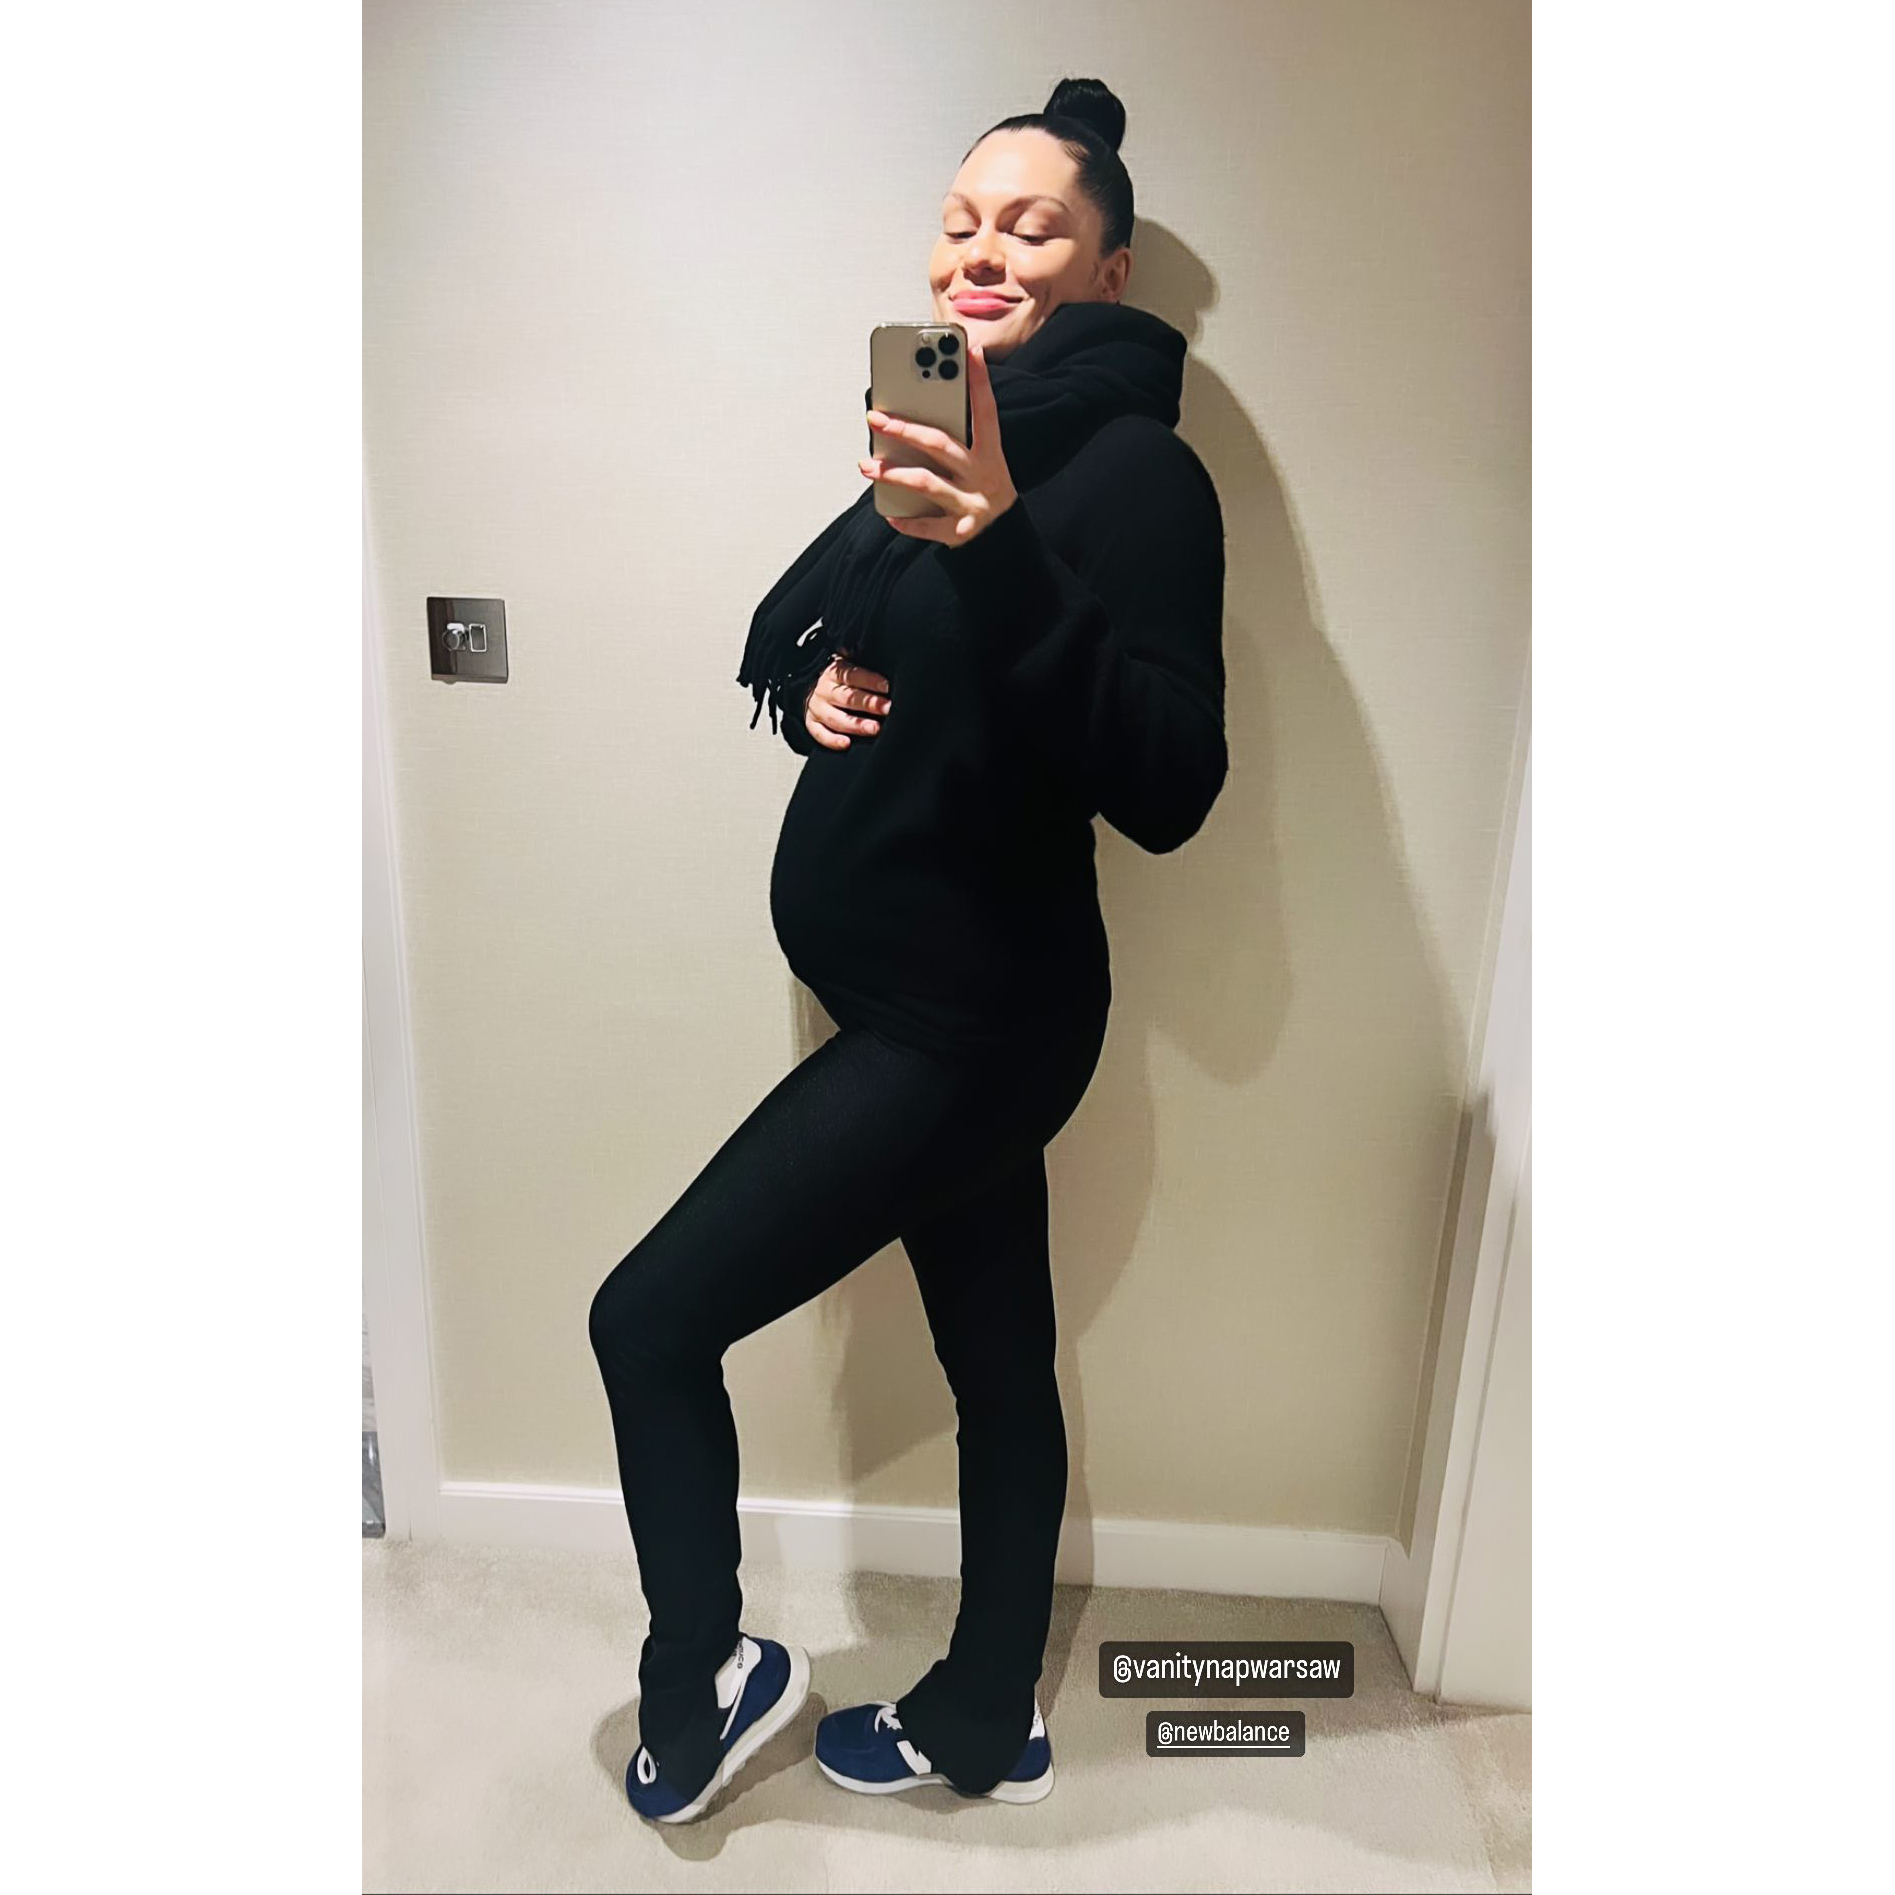 jessie js baby bump album before welcoming 1st child photos bumps day out